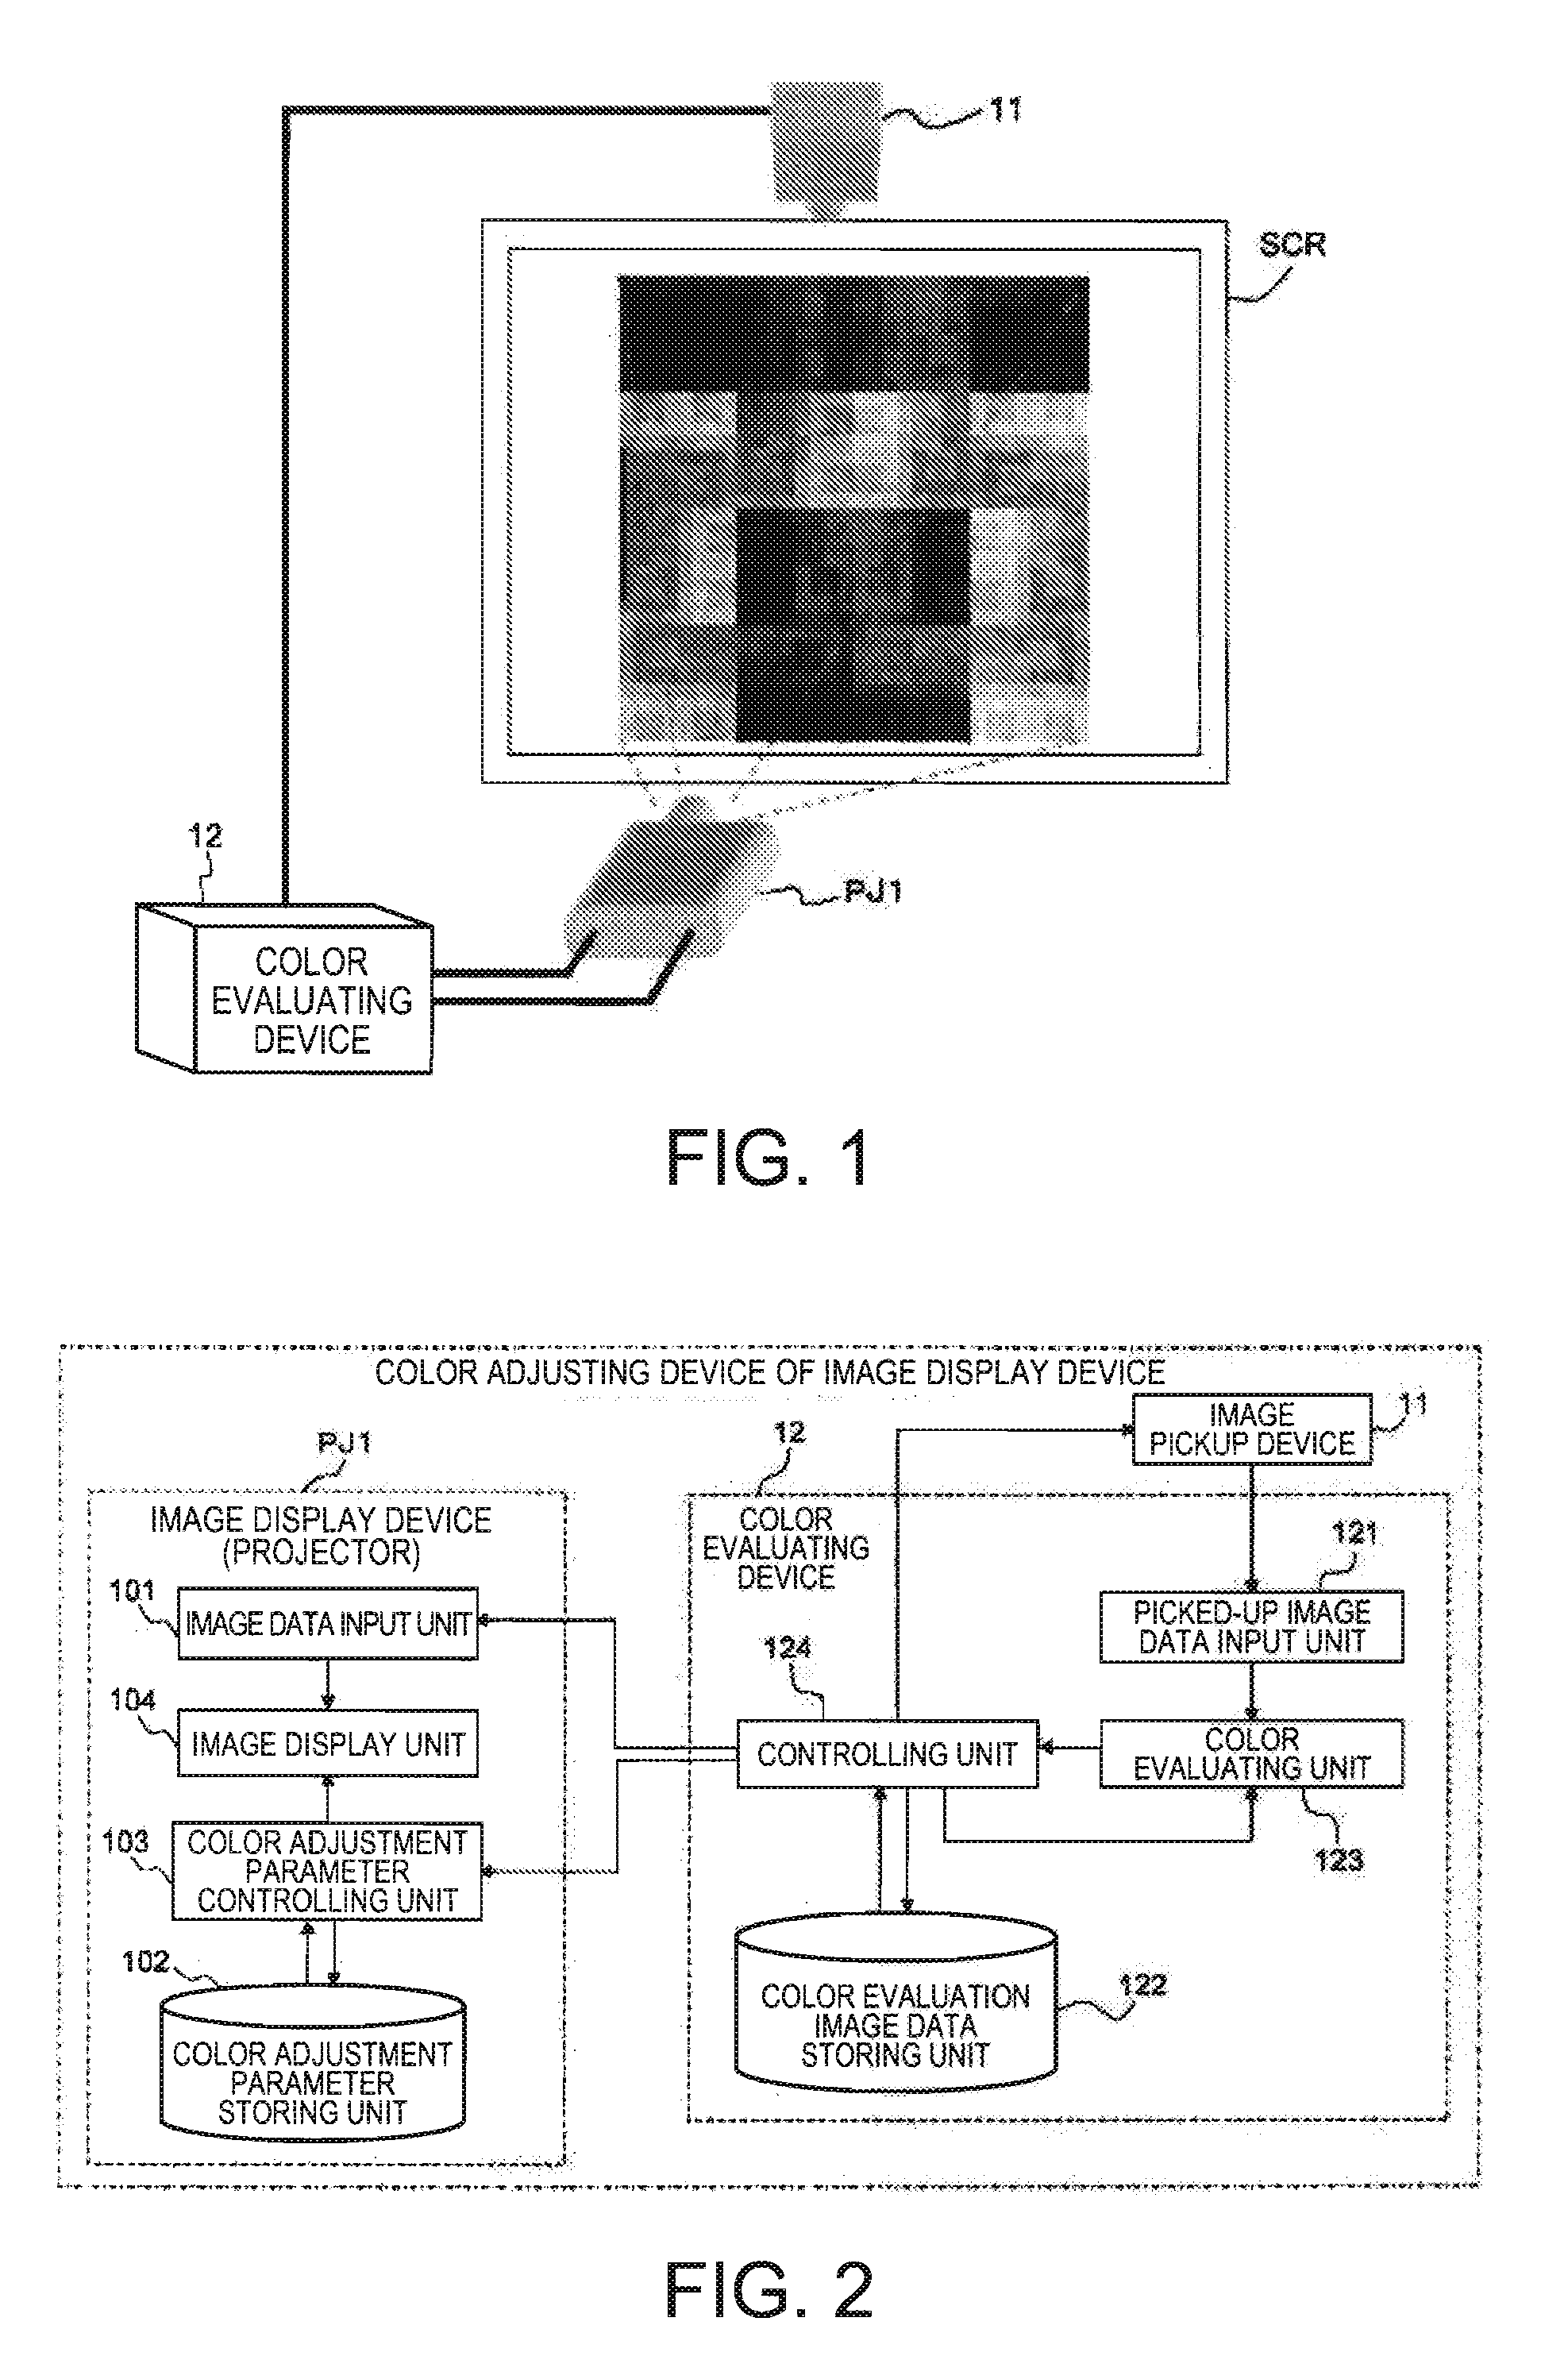 Color evaluating method of image display device